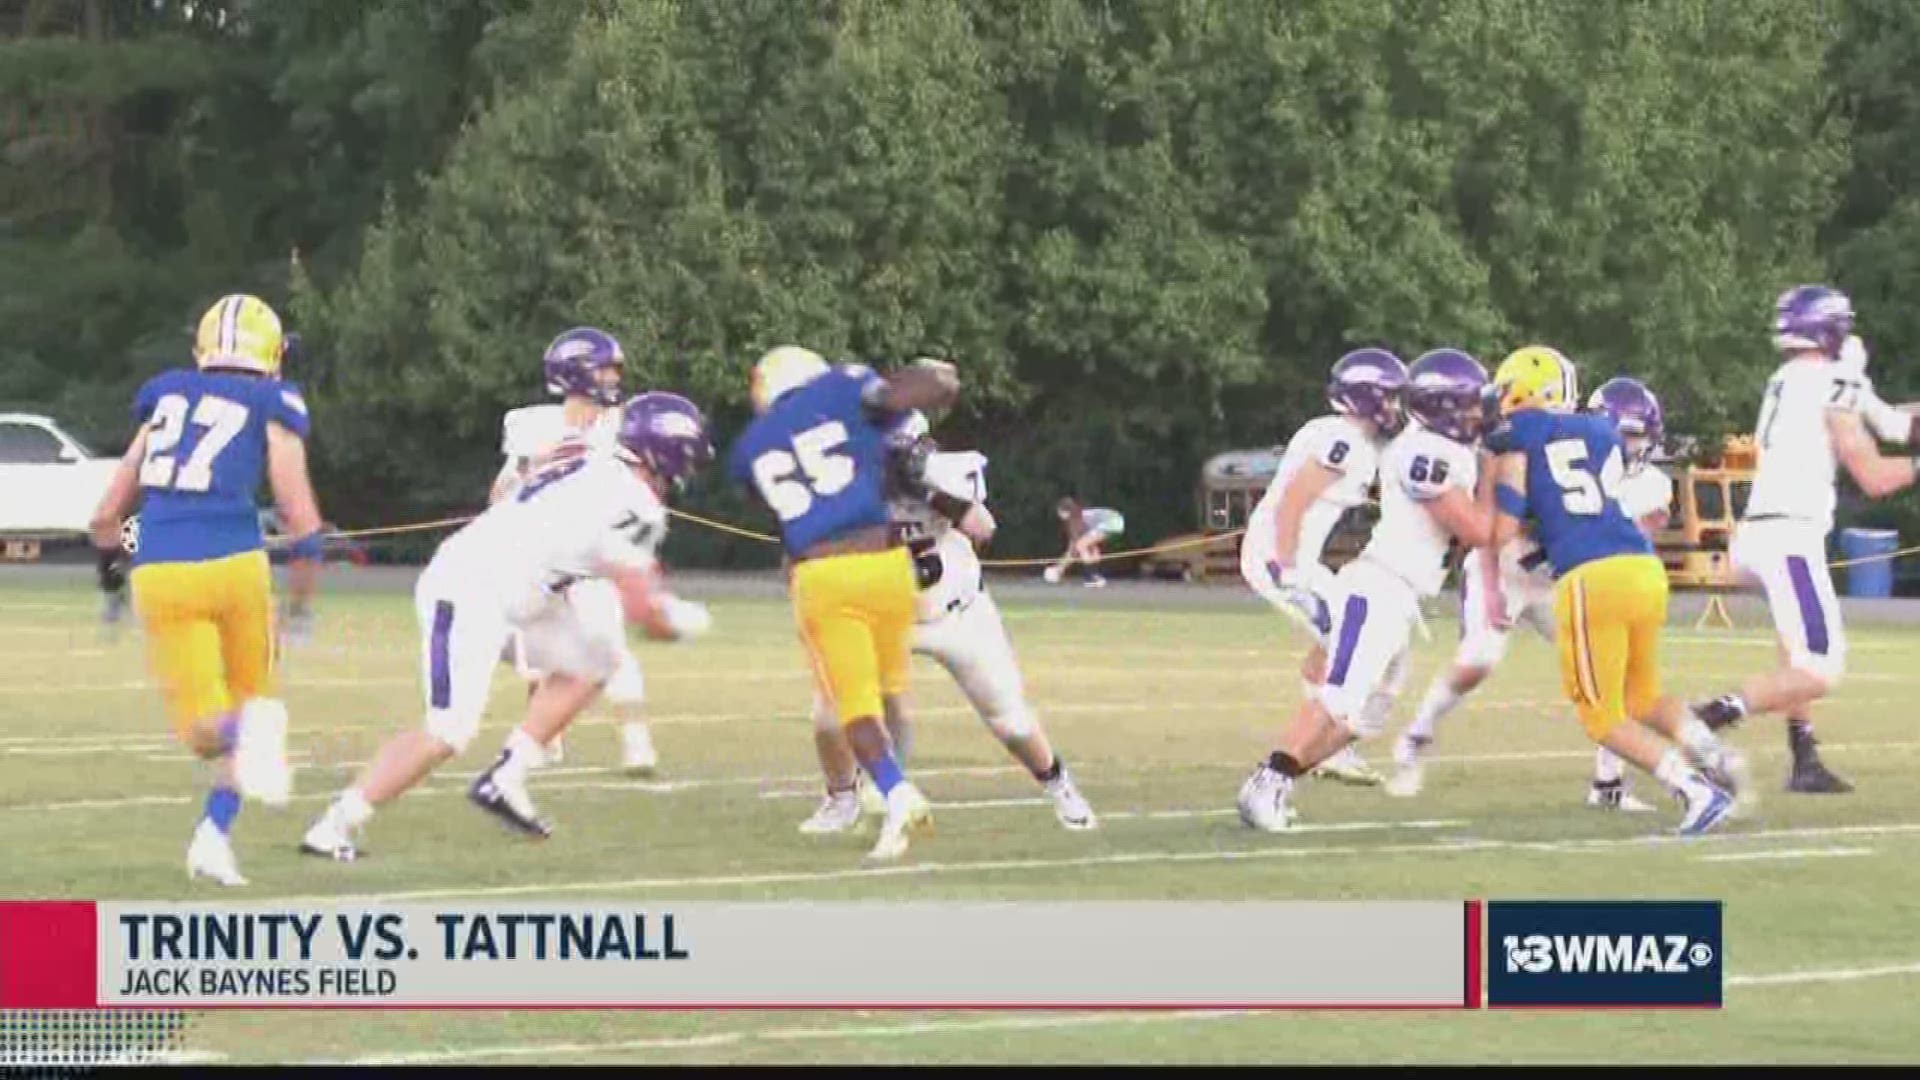 Here are your highlights from Football Friday Night on September 6.